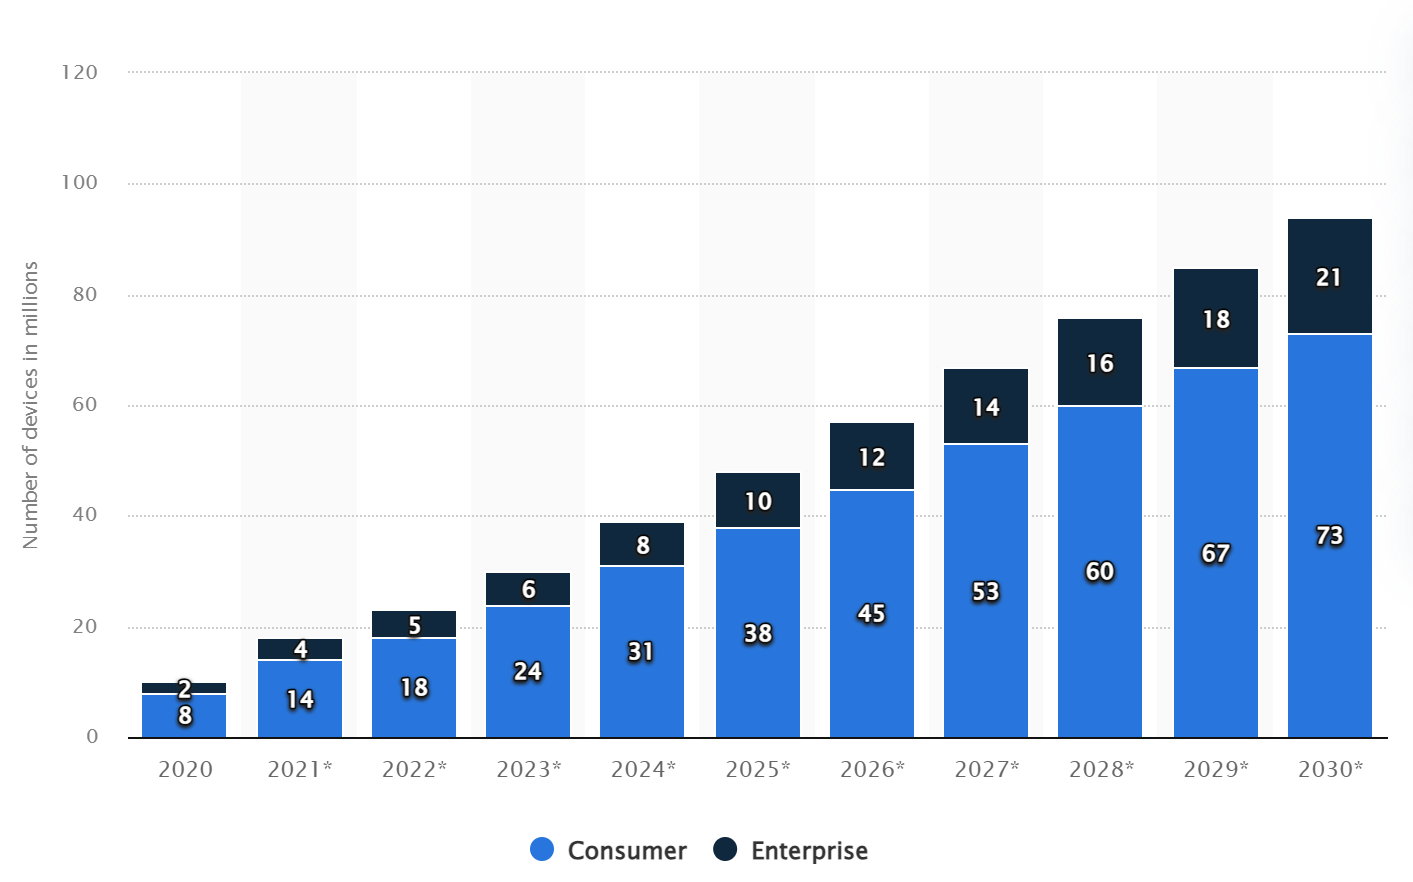 
VR-supported device growth: Statista